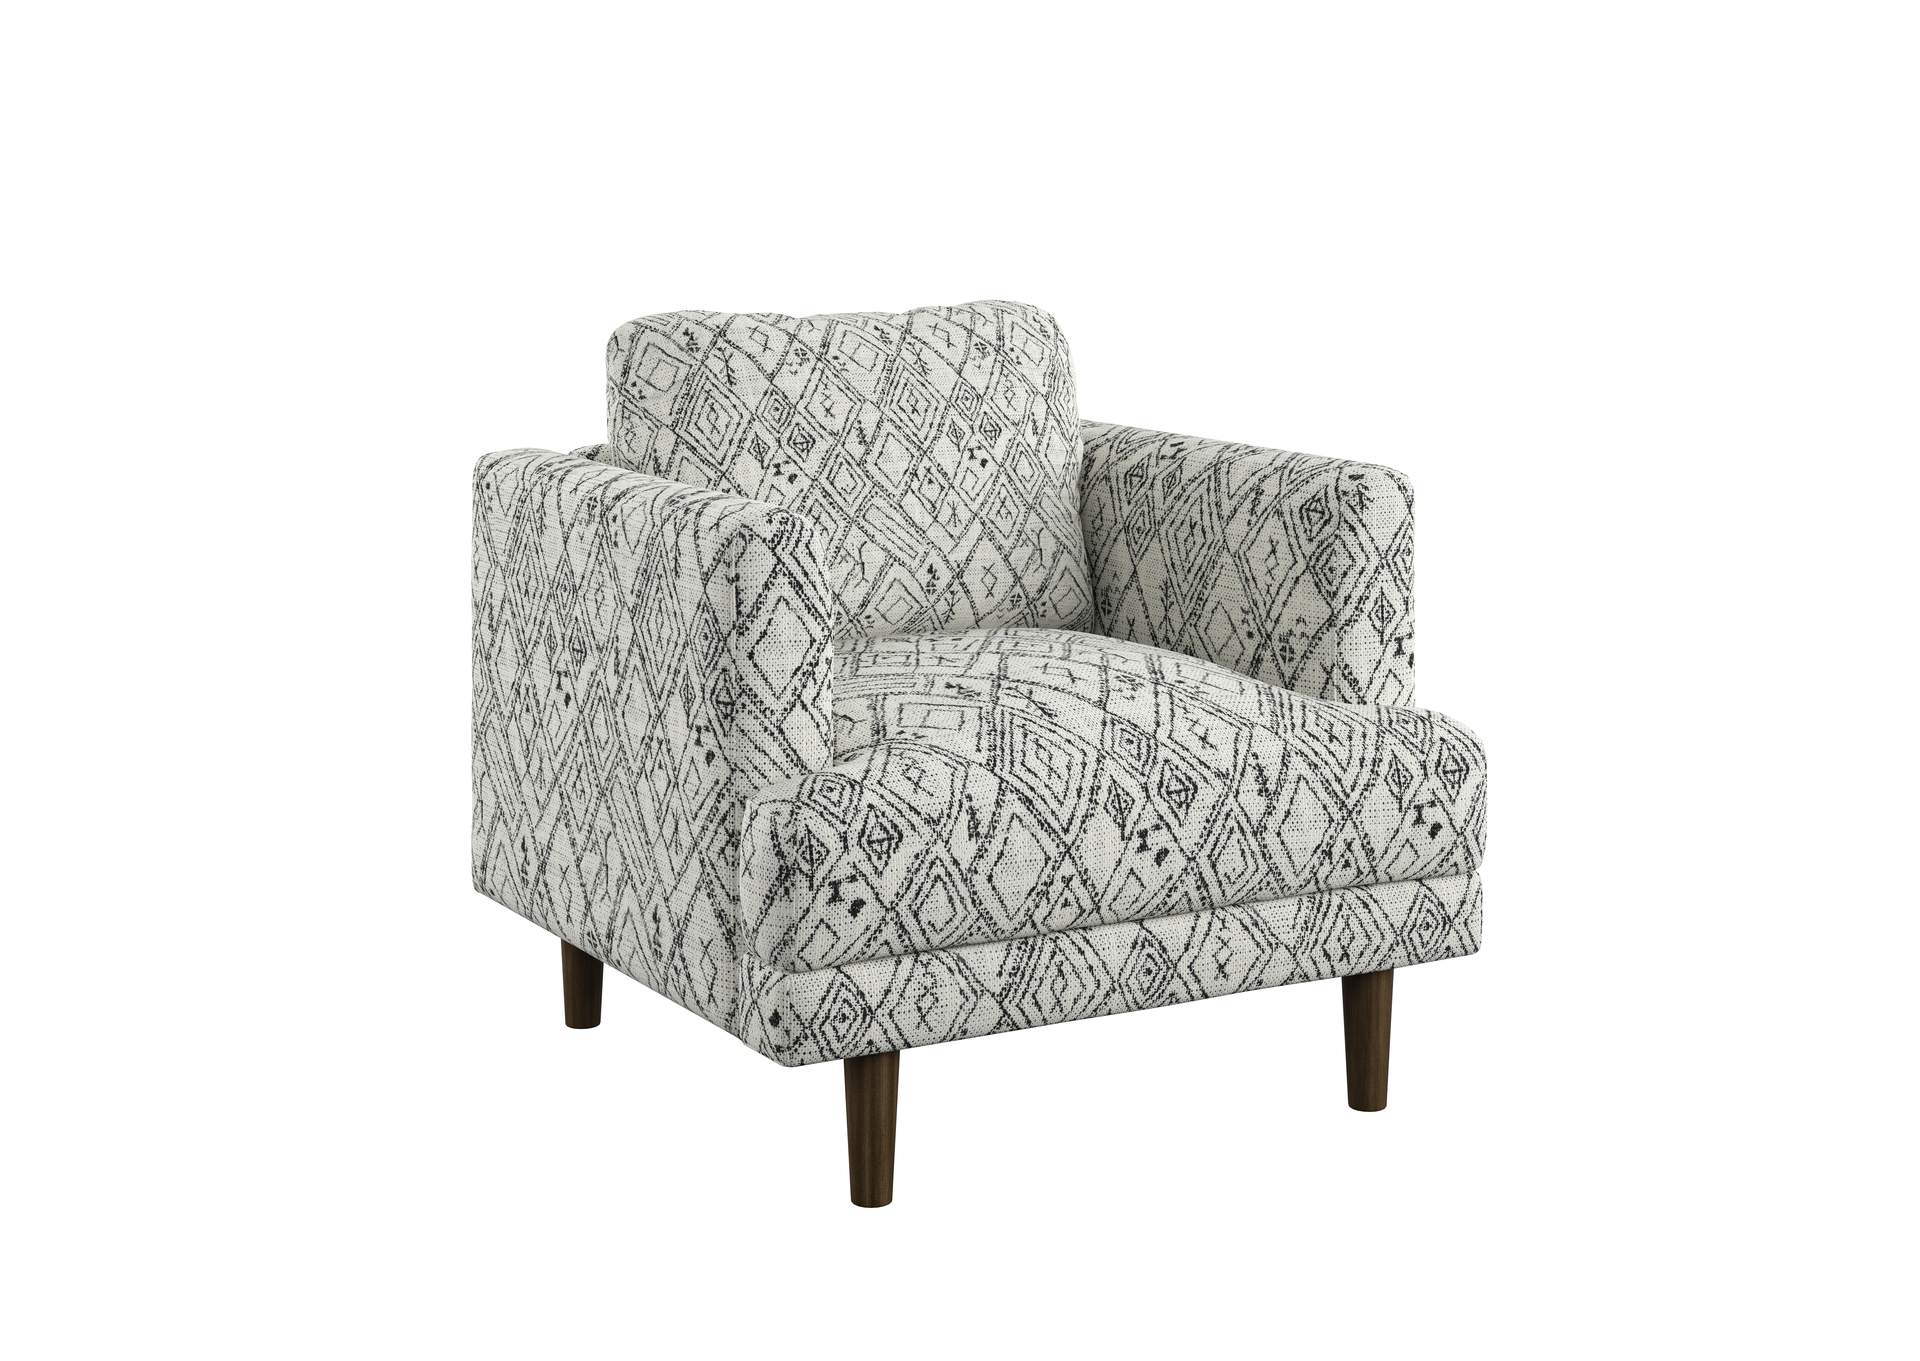 Juno Accent Chair,Emerald Home Furnishings